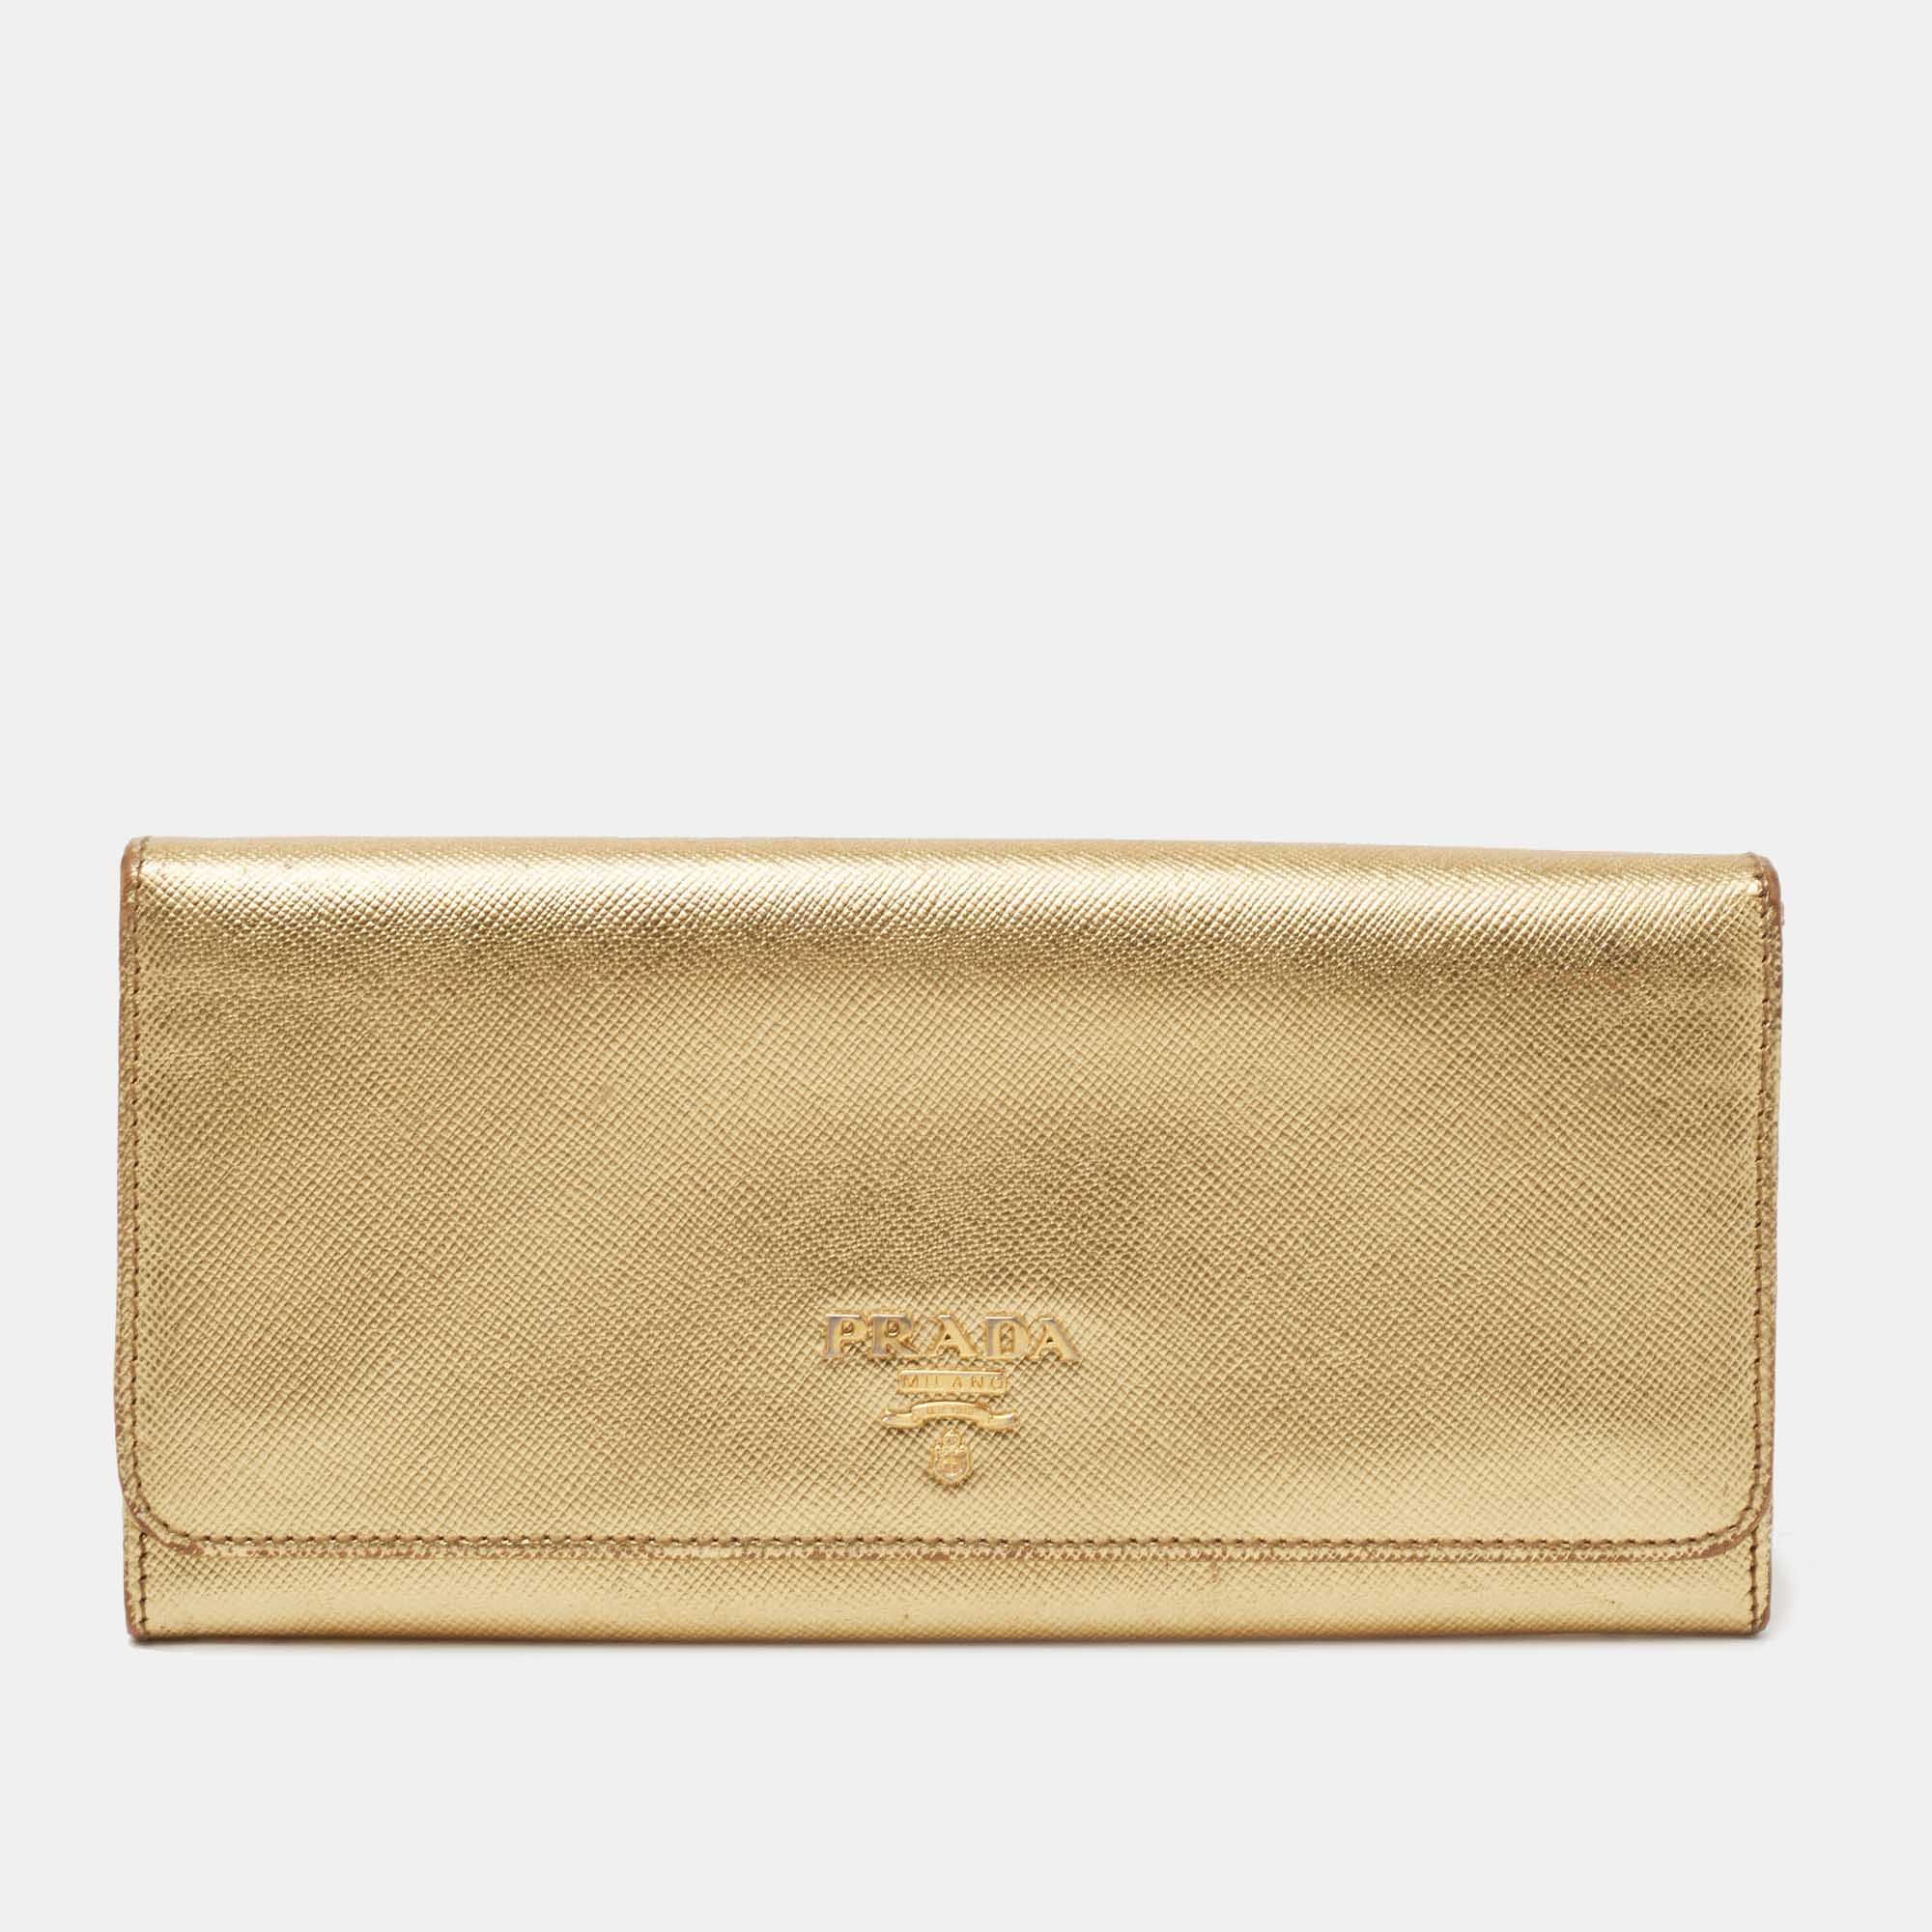 Prada Gold Saffiano Lux Leather Logo Flap Continental Wallet